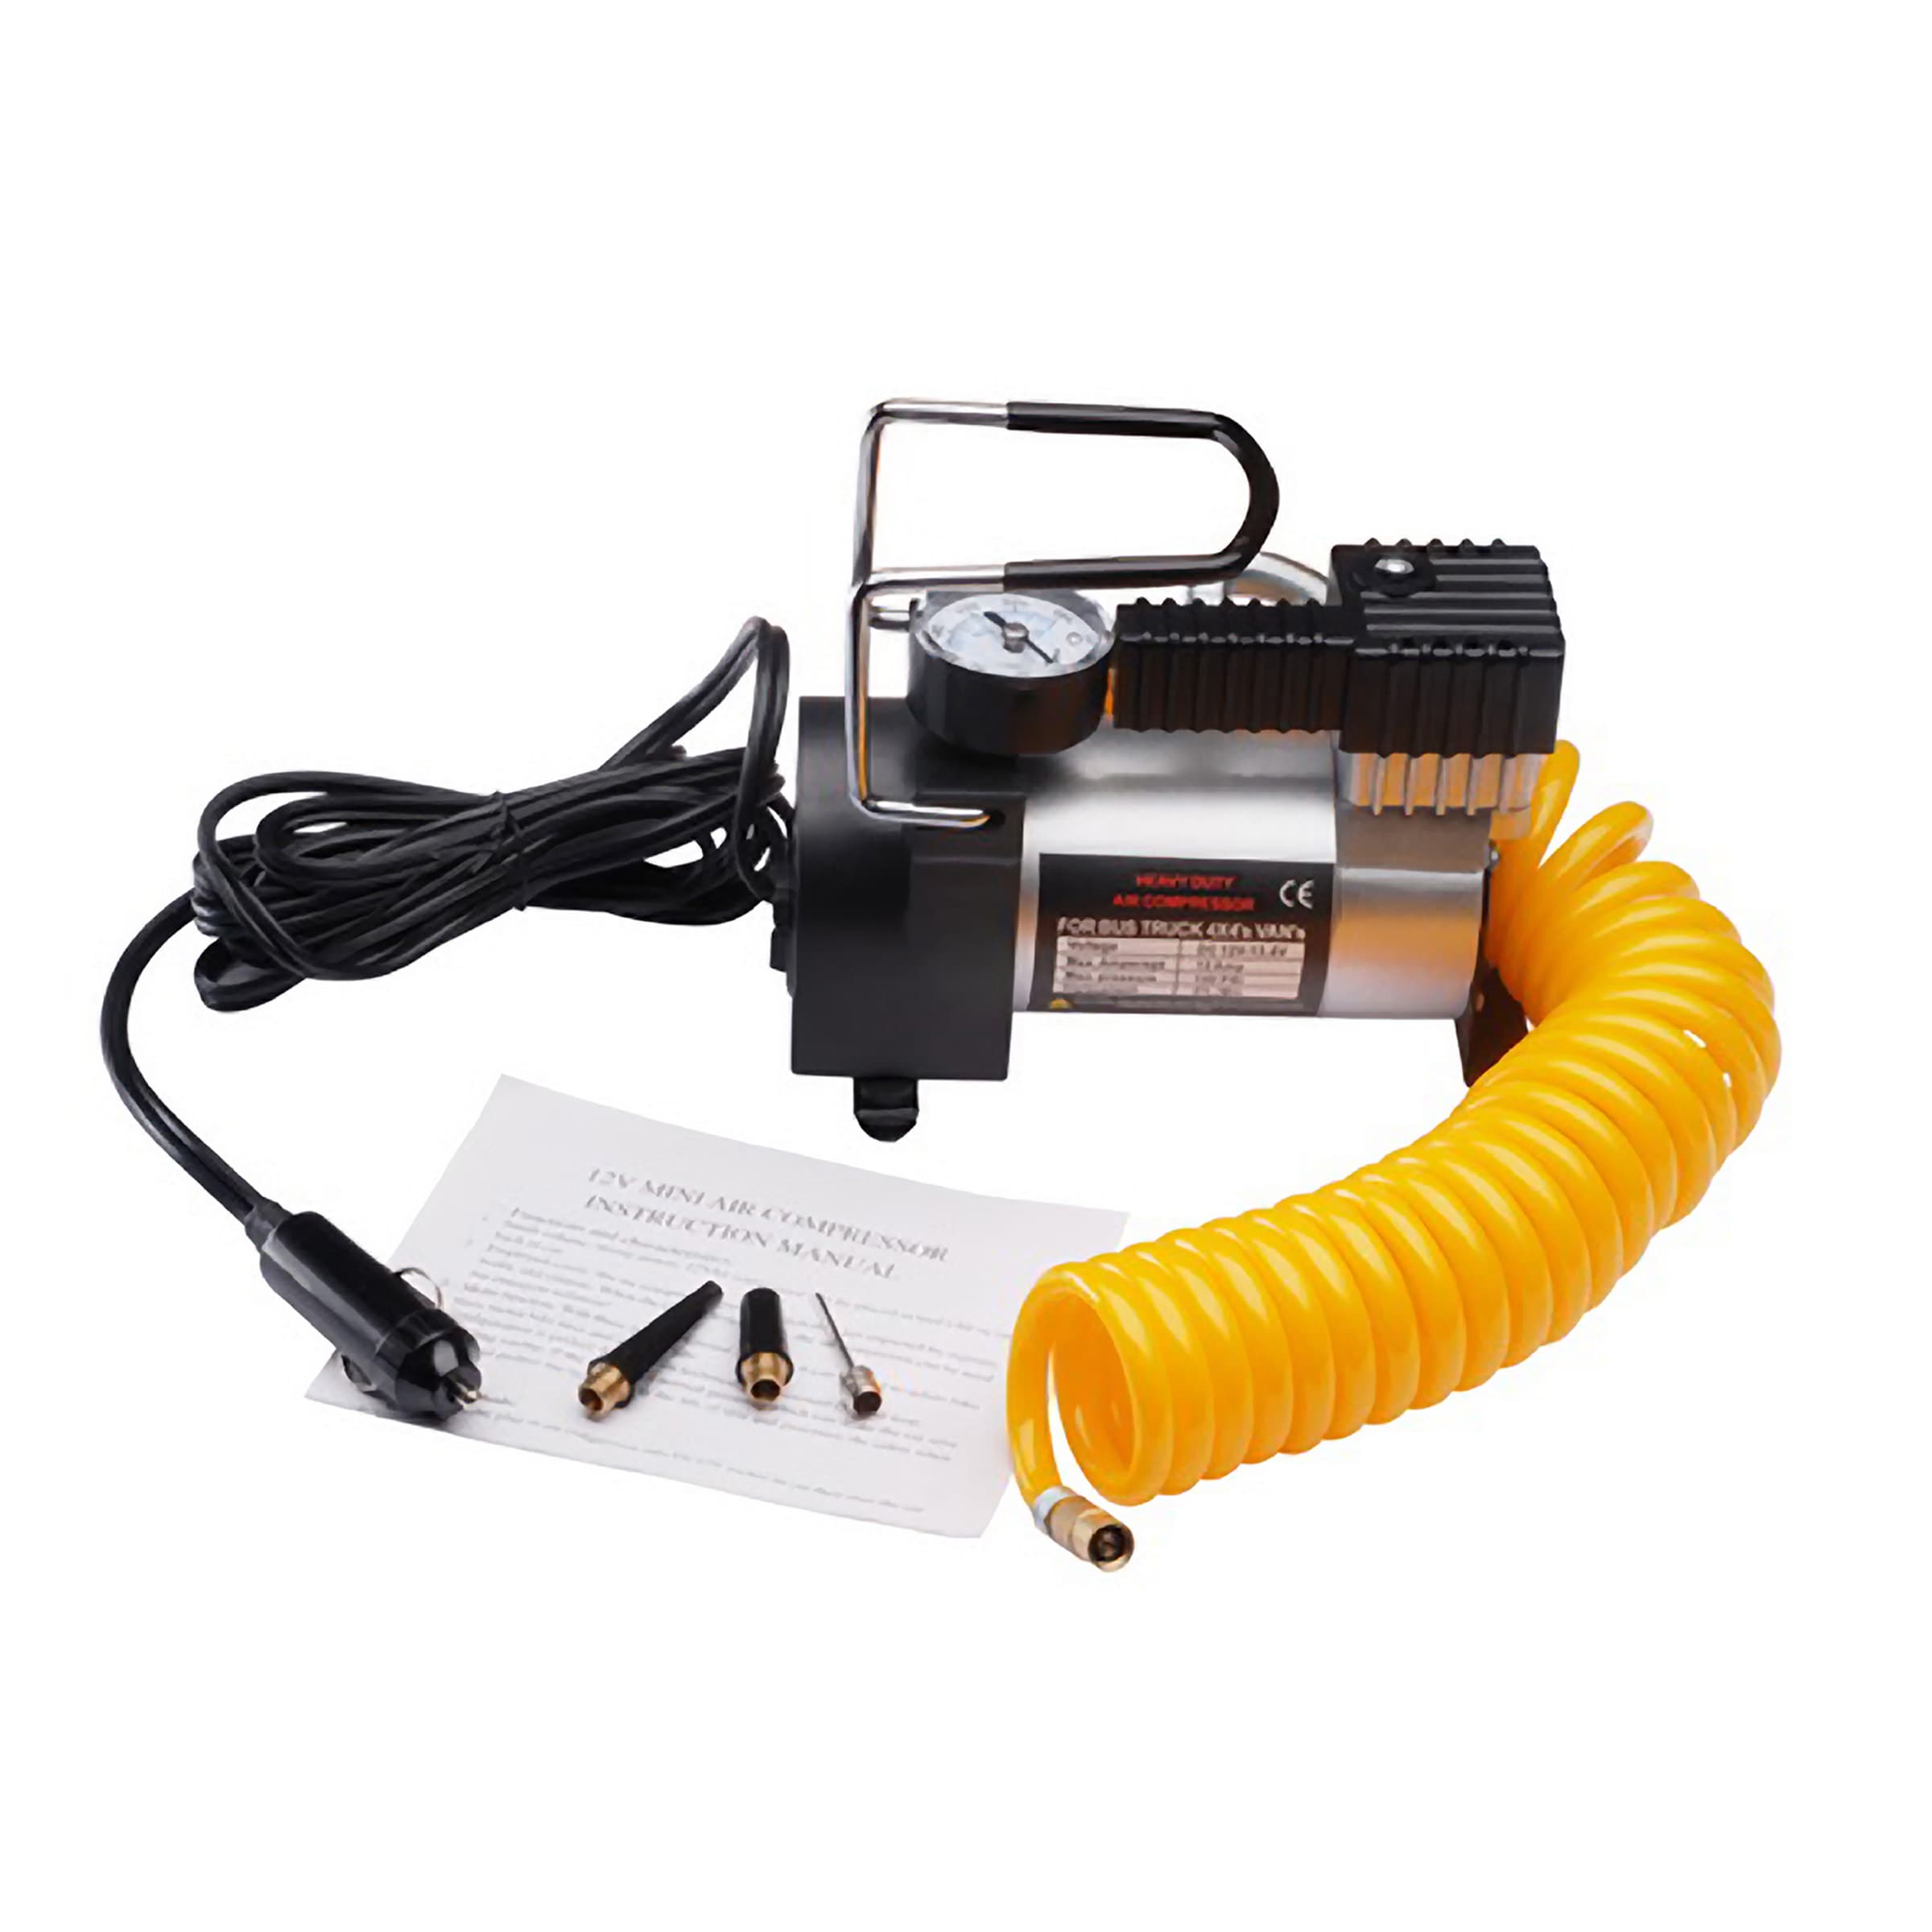 wholesale 12v tyre inflator, wholesale 12v tyre inflator Suppliers and  Manufacturers at